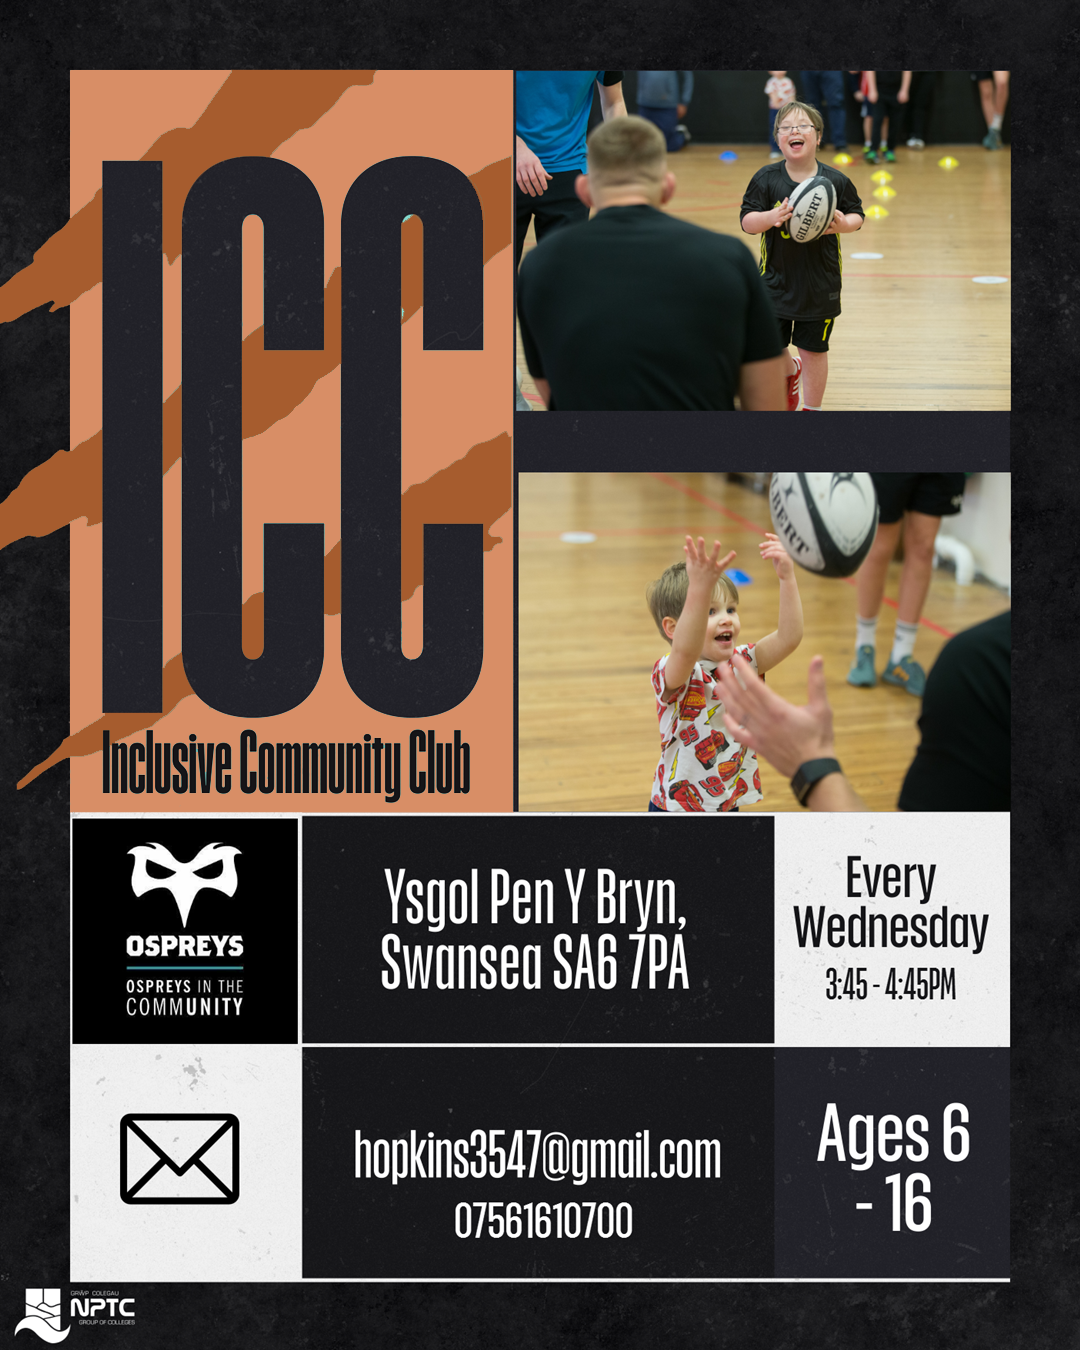 ICC at Ysgol Pen y Bryn, Swansea SA6 7PA. Ages 6-16. Every Wednesday 3:45-4:45pm. Email hopkins3547@gmail.com or call 07561610700